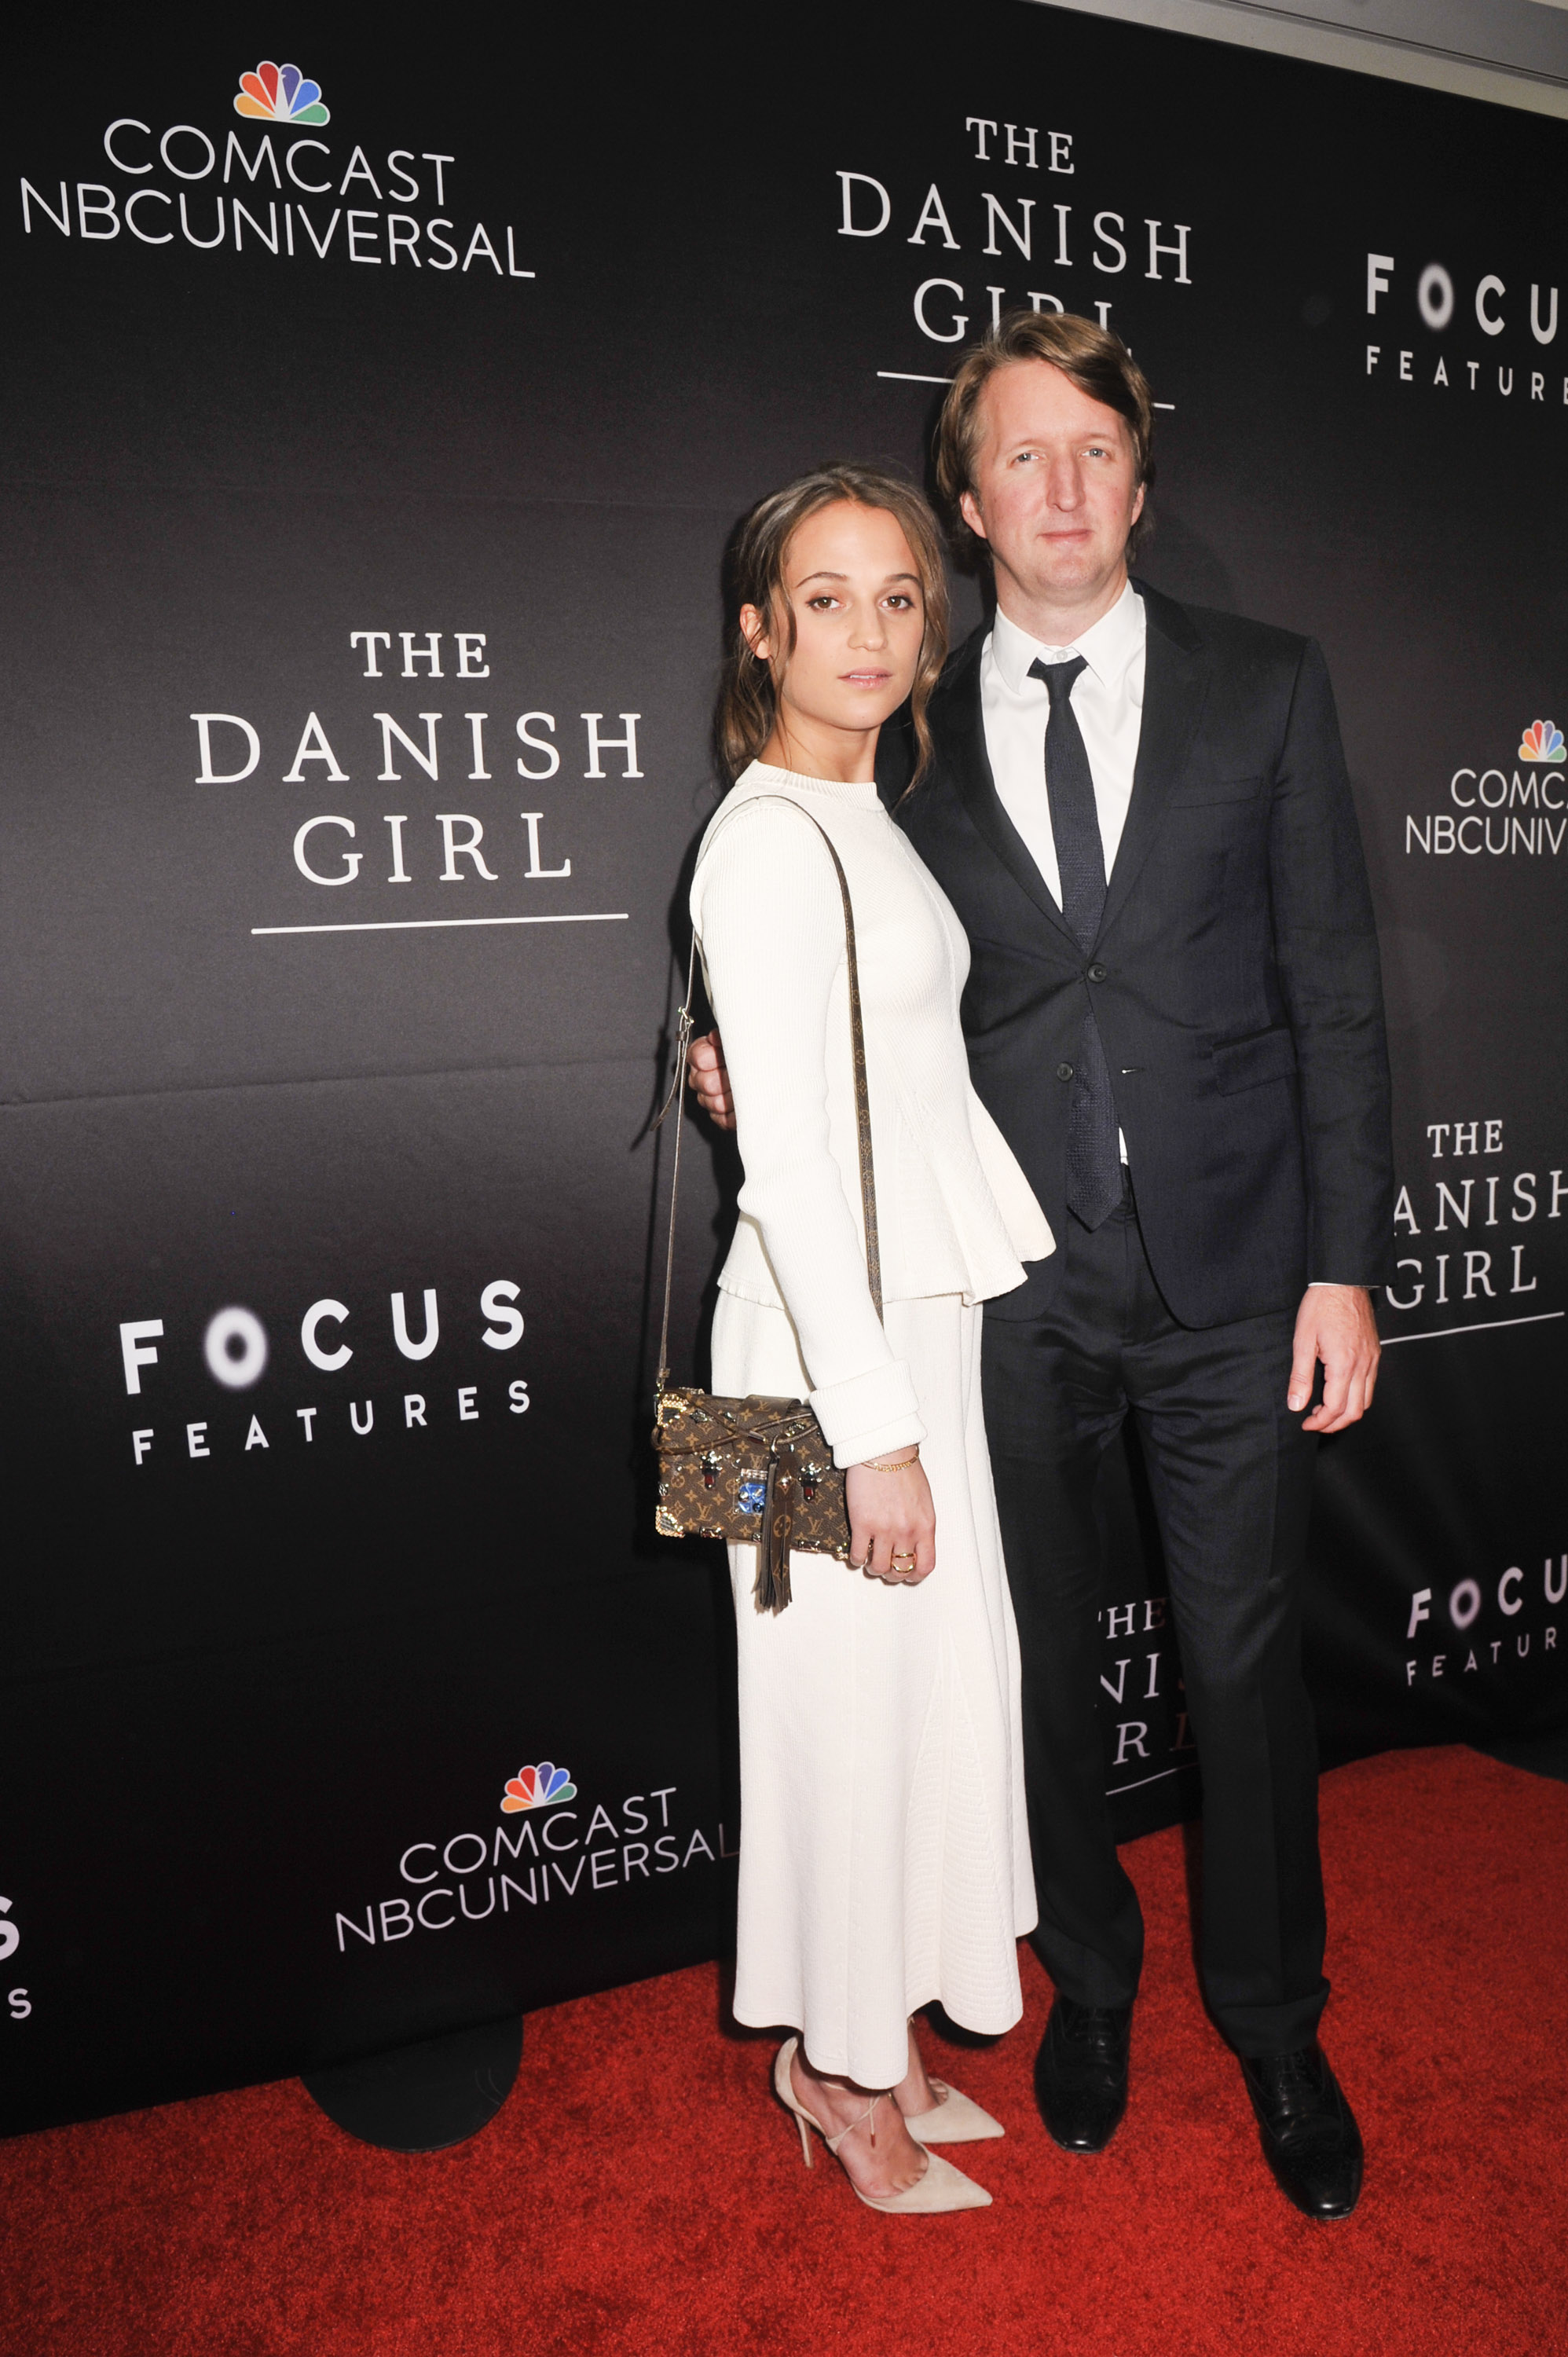 Alicia Vikander, actress, The Danish Girl; Tom Hooper, director, The Danish Girl, attend the DC premiere of Focus Features' "THE DANISH GIRL" at the United States Navy Memorial in Washington DC on November 23, 2015. (Photo by Kris Connor for Focus Features)